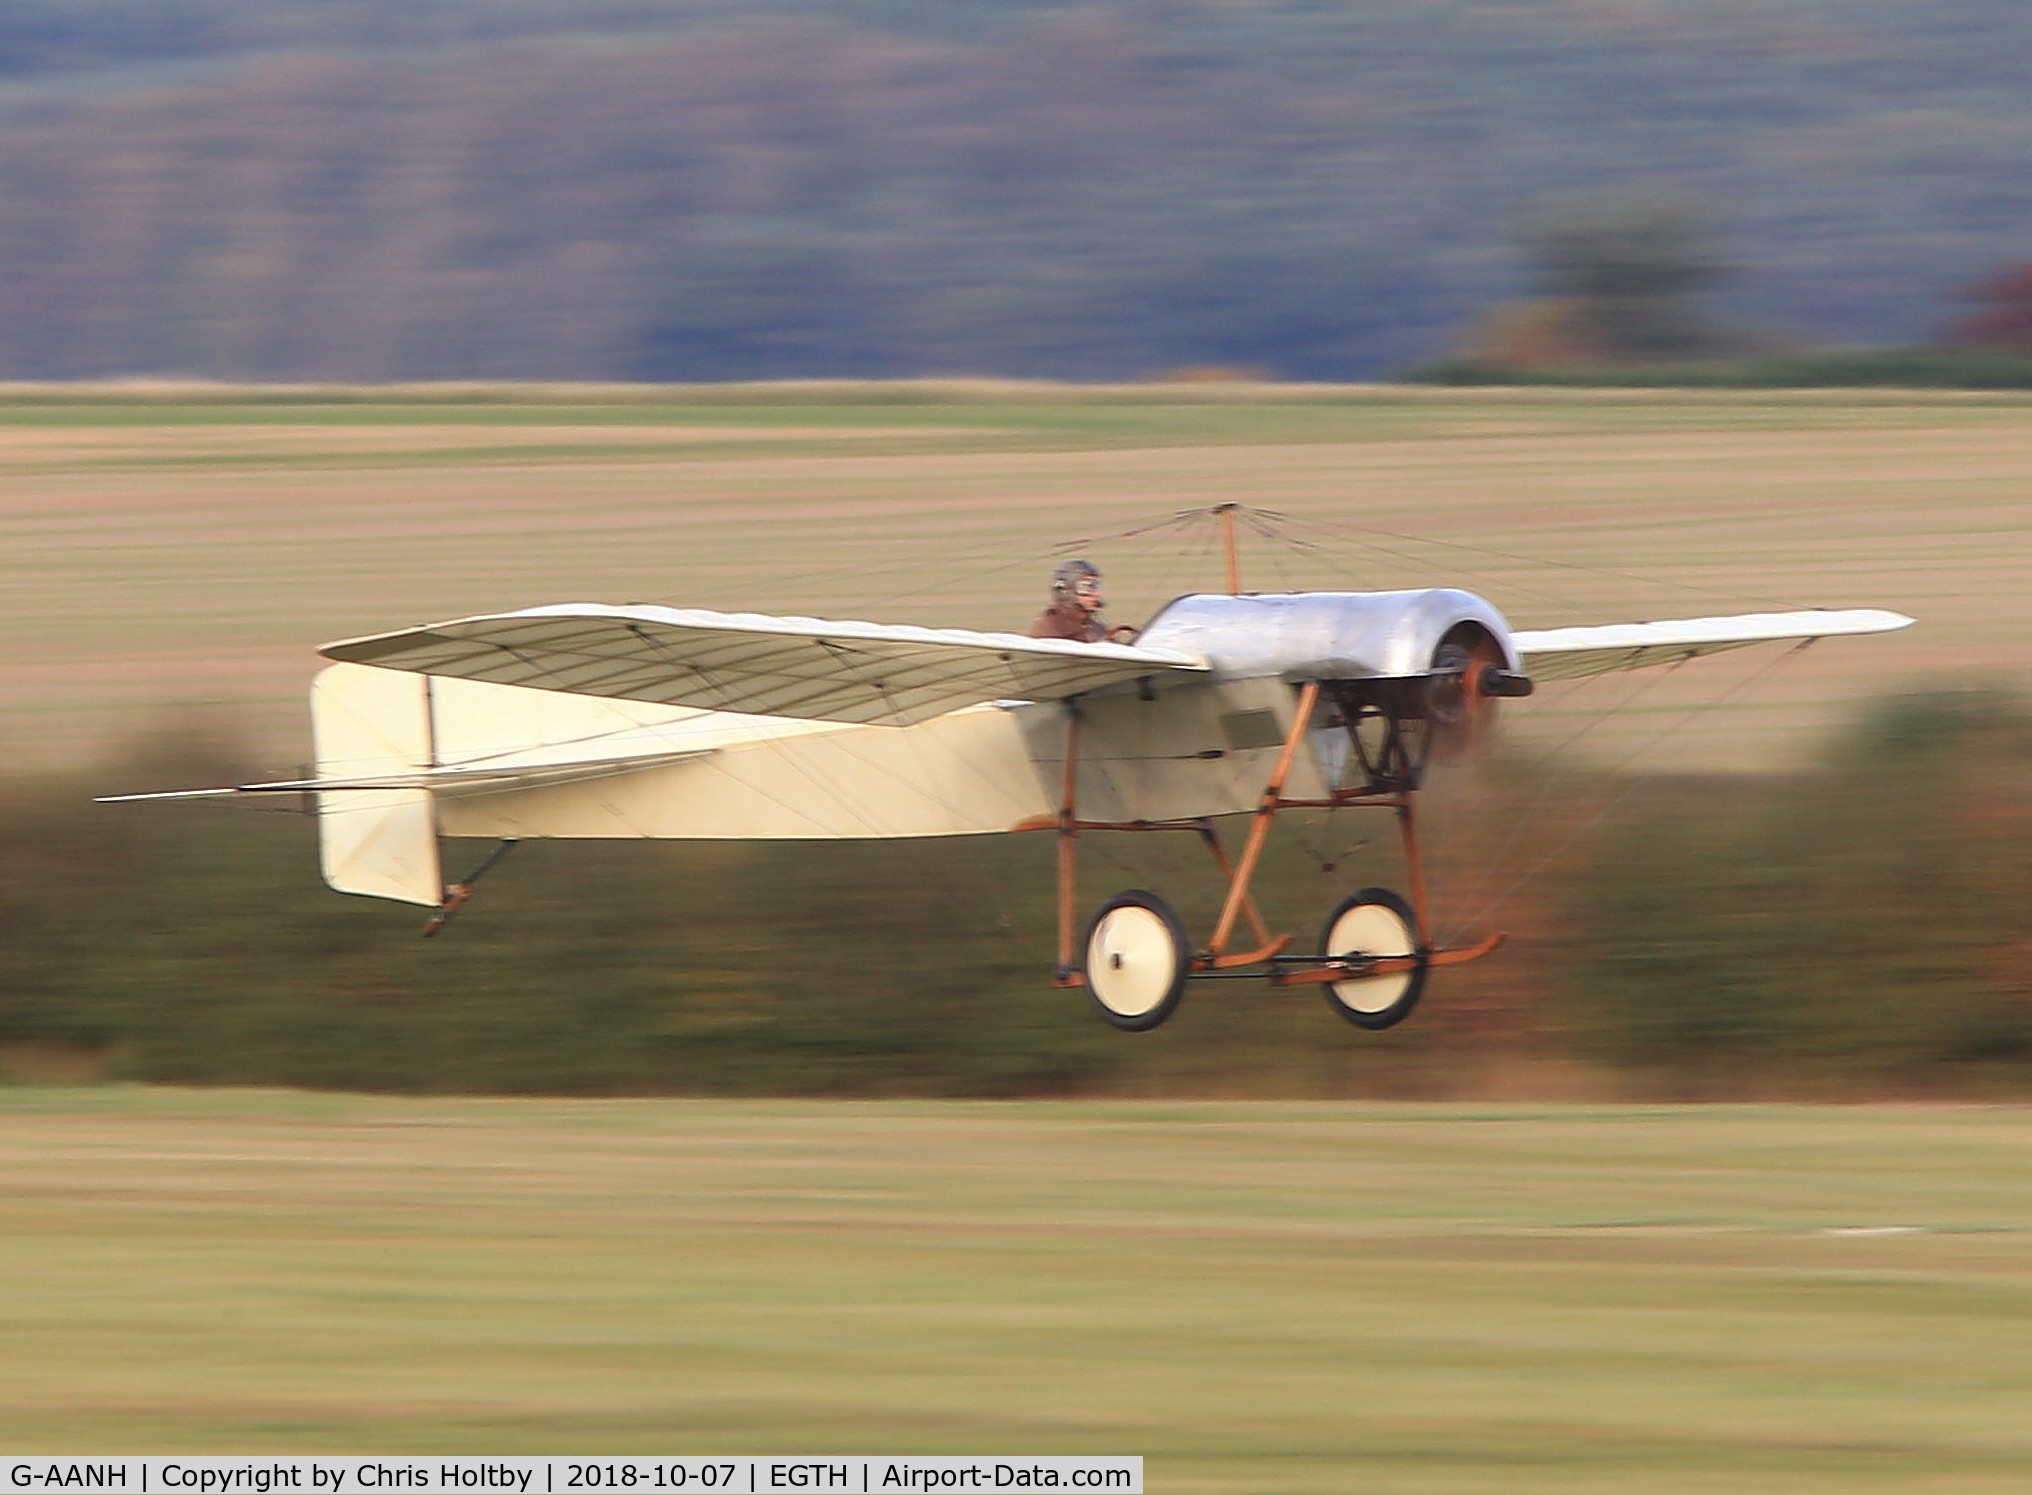 G-AANH, 1910 Deperdussin Monoplane Type D C/N BAPC005, Those who waited for the Edwardians at the end of the 2018 Race Day at Old Warden were rewarded with the original 1910 Deperdussin Monoplane take to the air in windless conditions. Took some firing up and landed at the end of the runway. Fantastic.